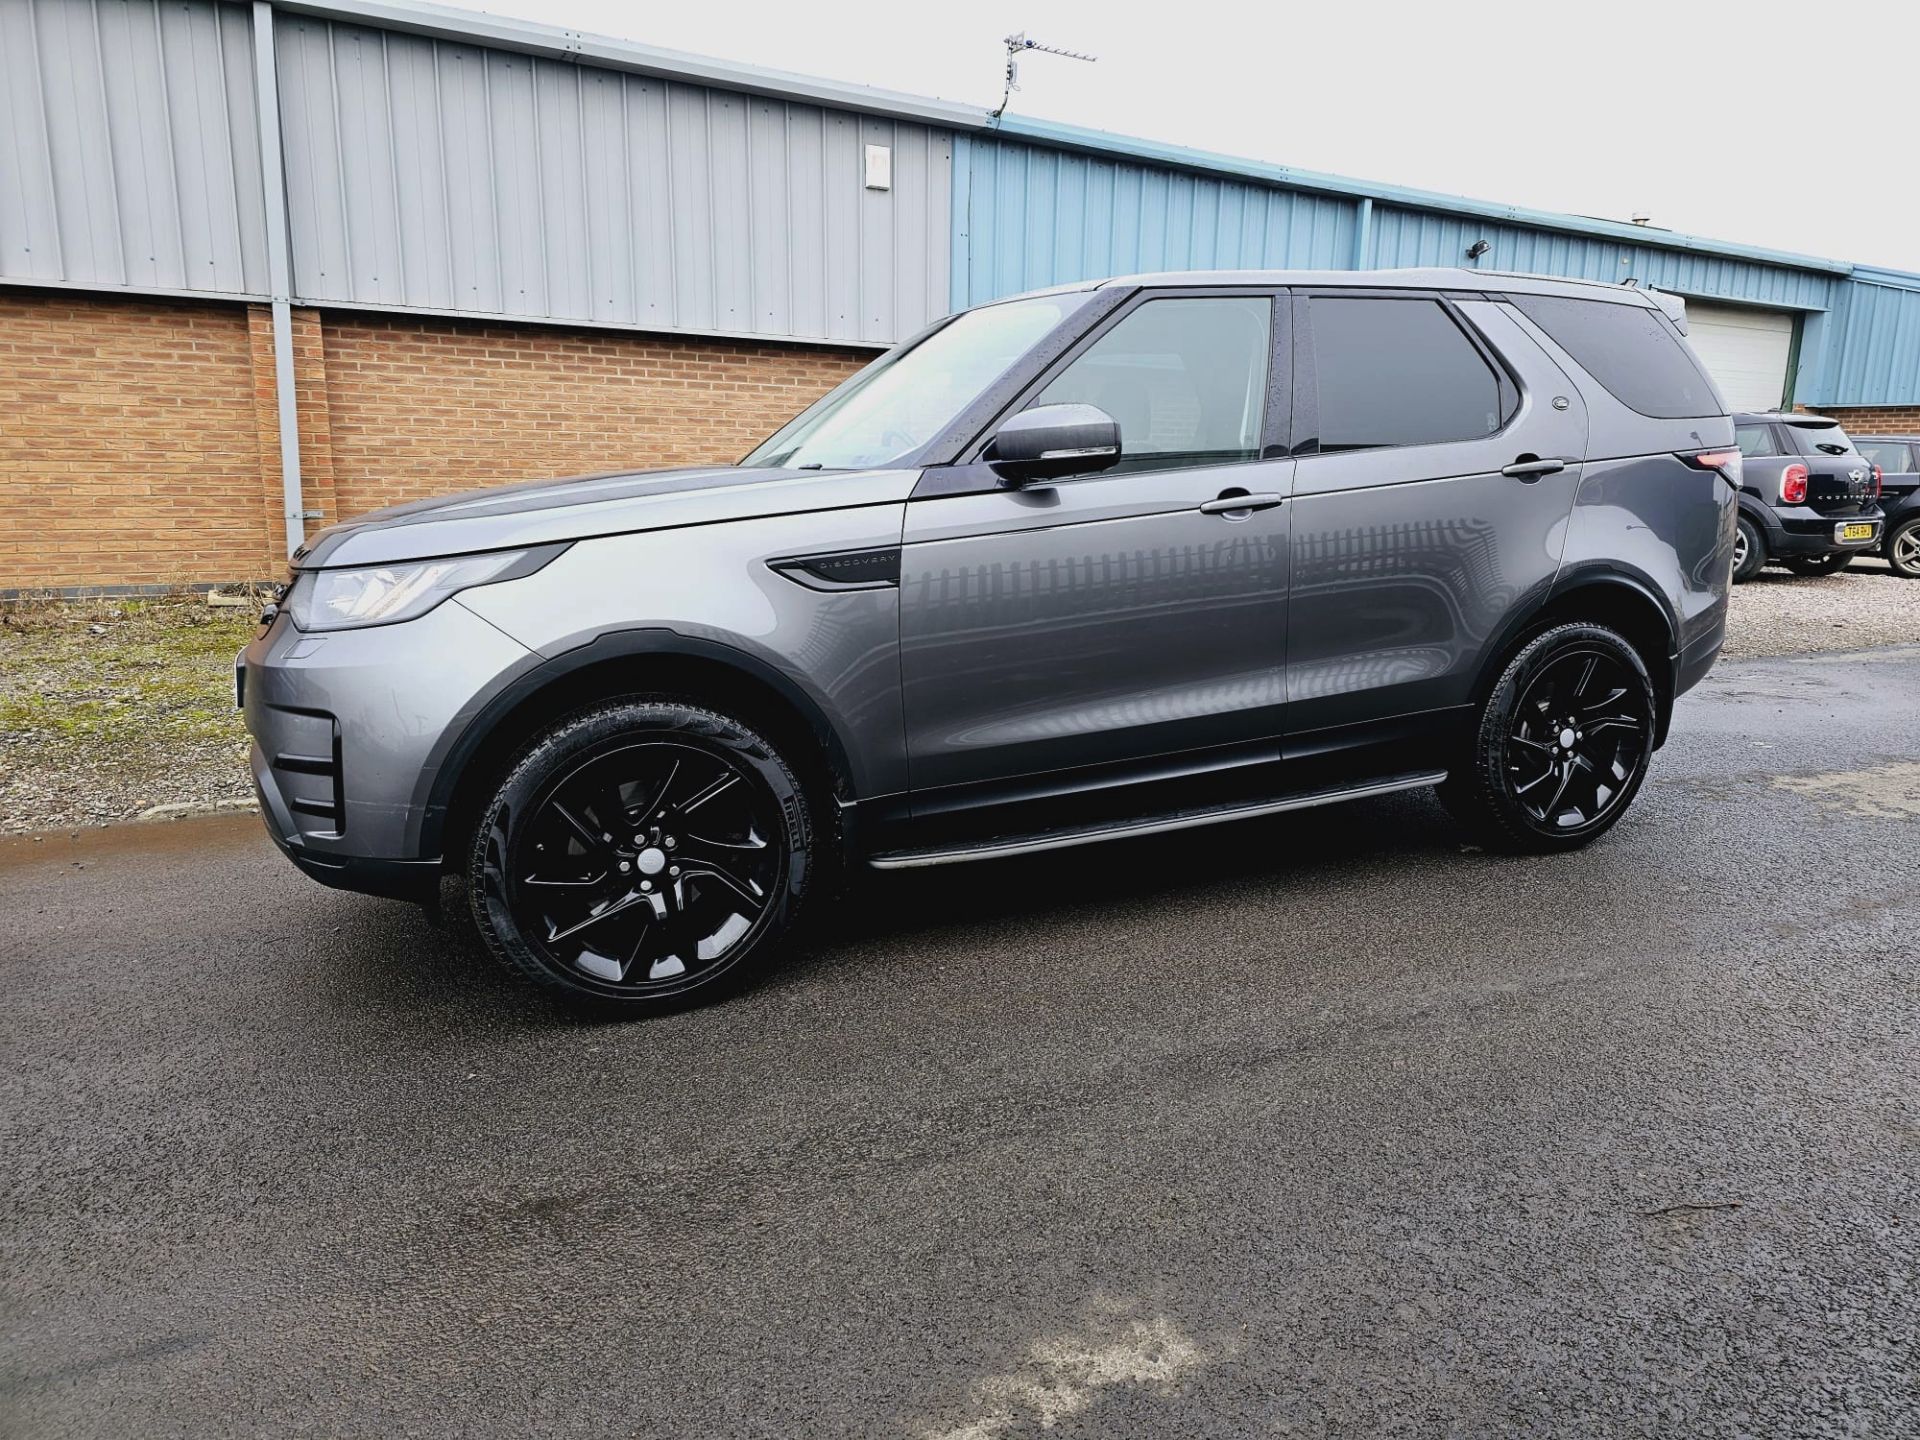 Land Rover Discovery 5 - (New Model) Diesel Auto - 2018 Model - Black Pack Edition - Sat Nav - Look - Image 8 of 45